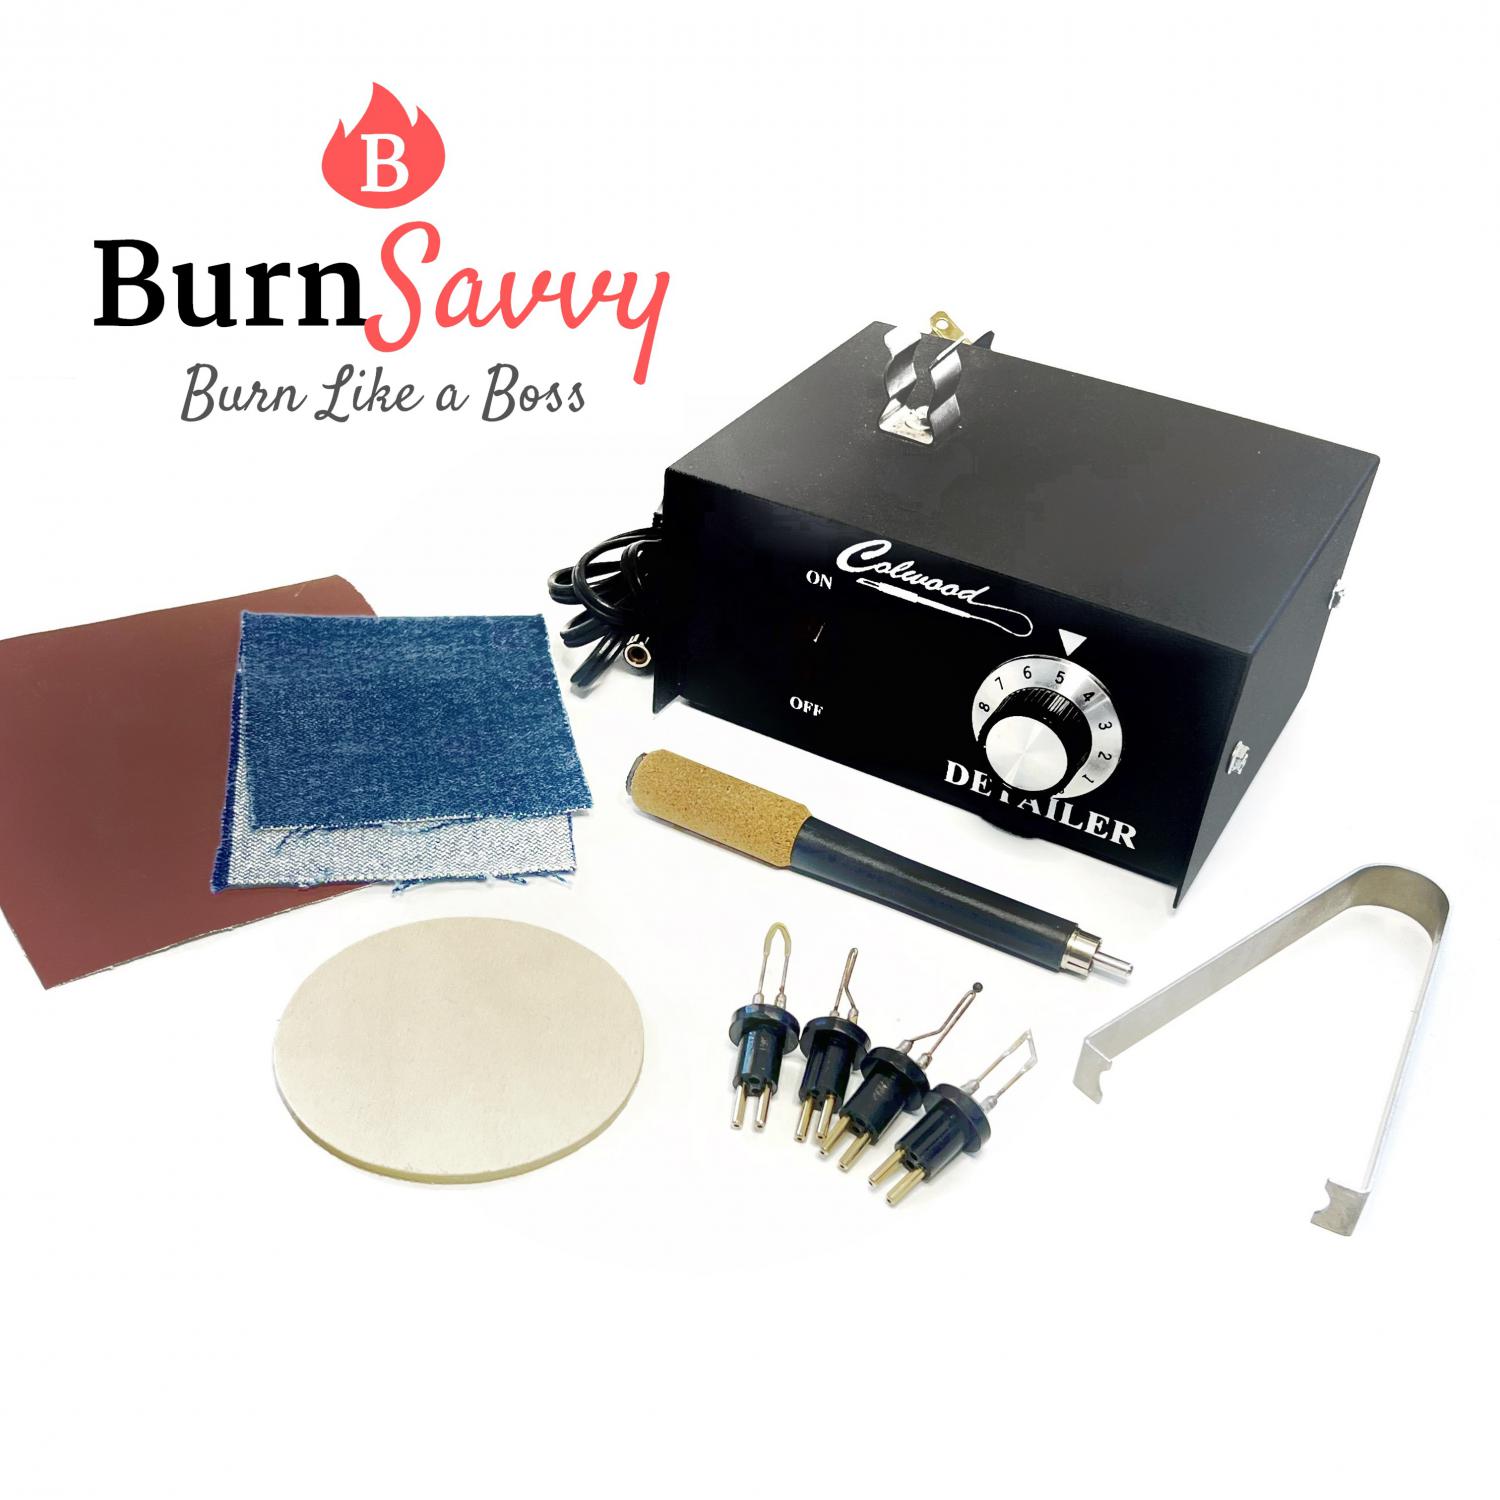 NSI Wood Burning Kit Recommended for Ages 14 Years and up